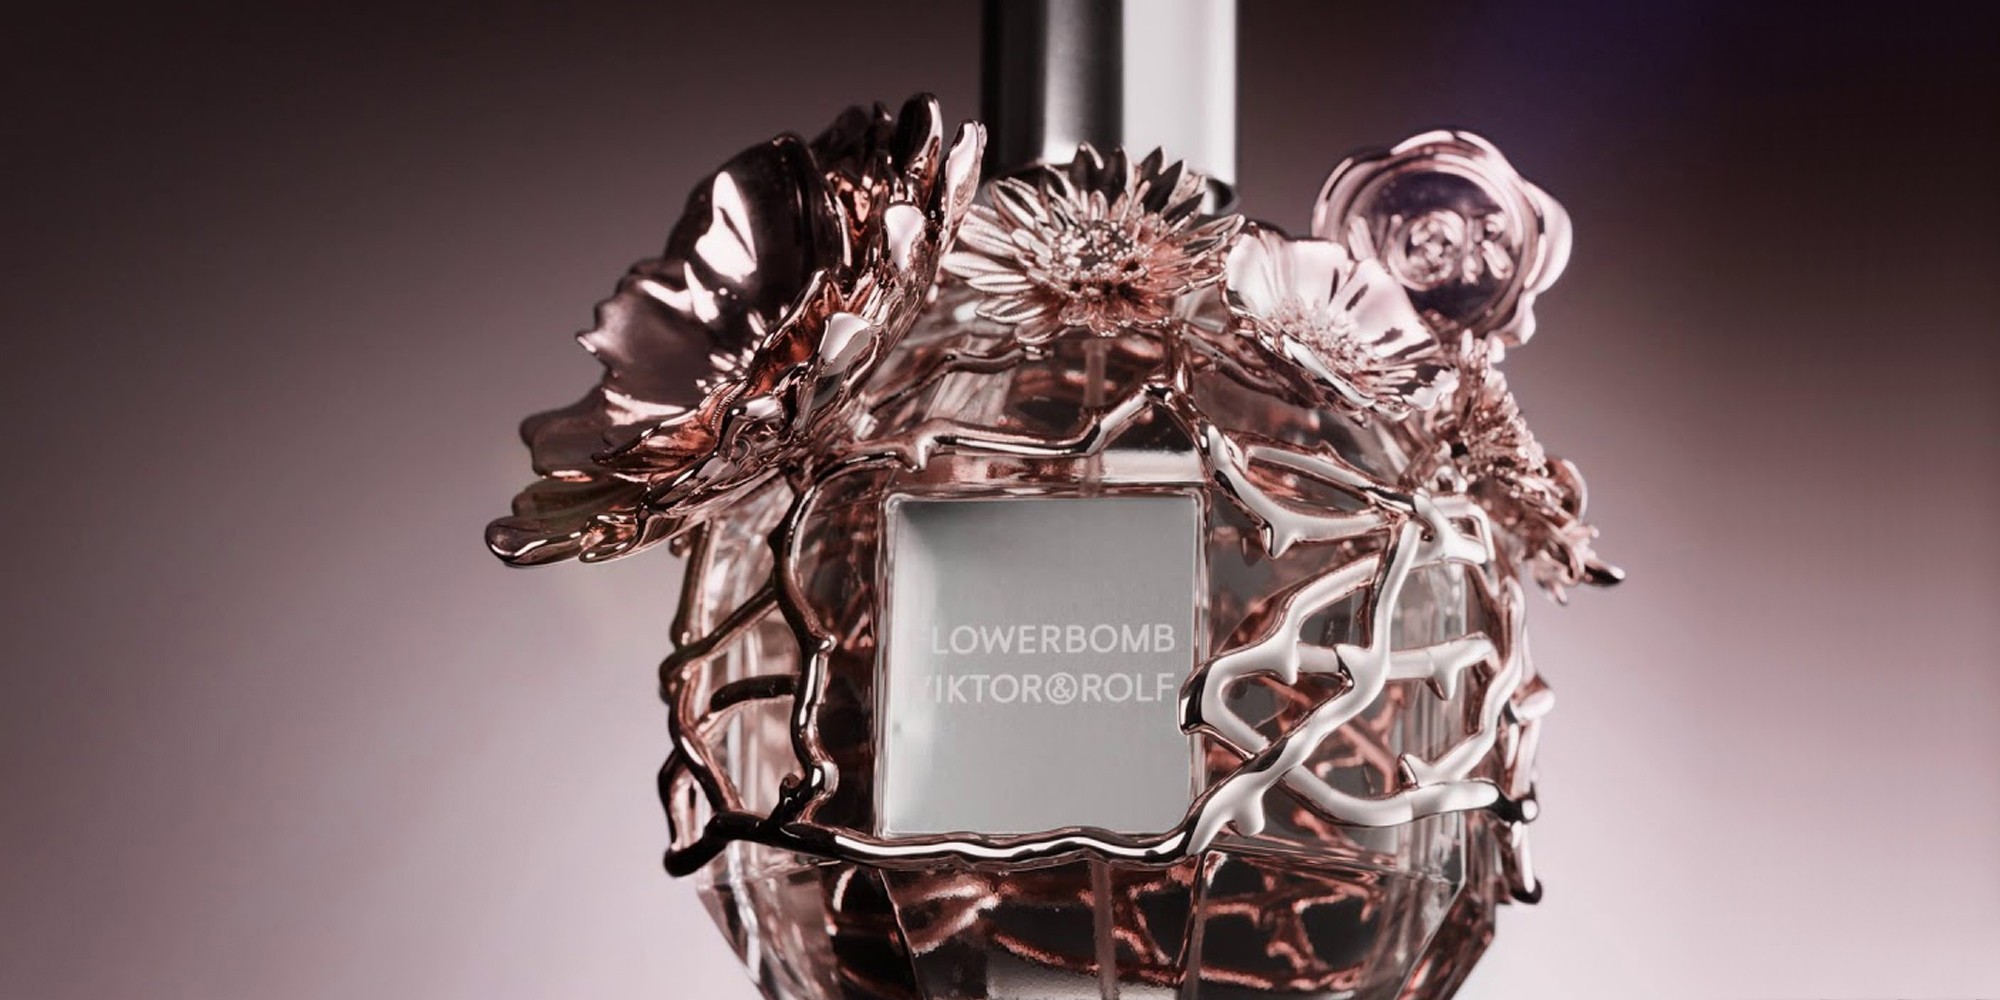 VIKTOR & ROLF FLOWERBOMB 15TH ANNIVERSARY HAUTE COUTURE EDITION